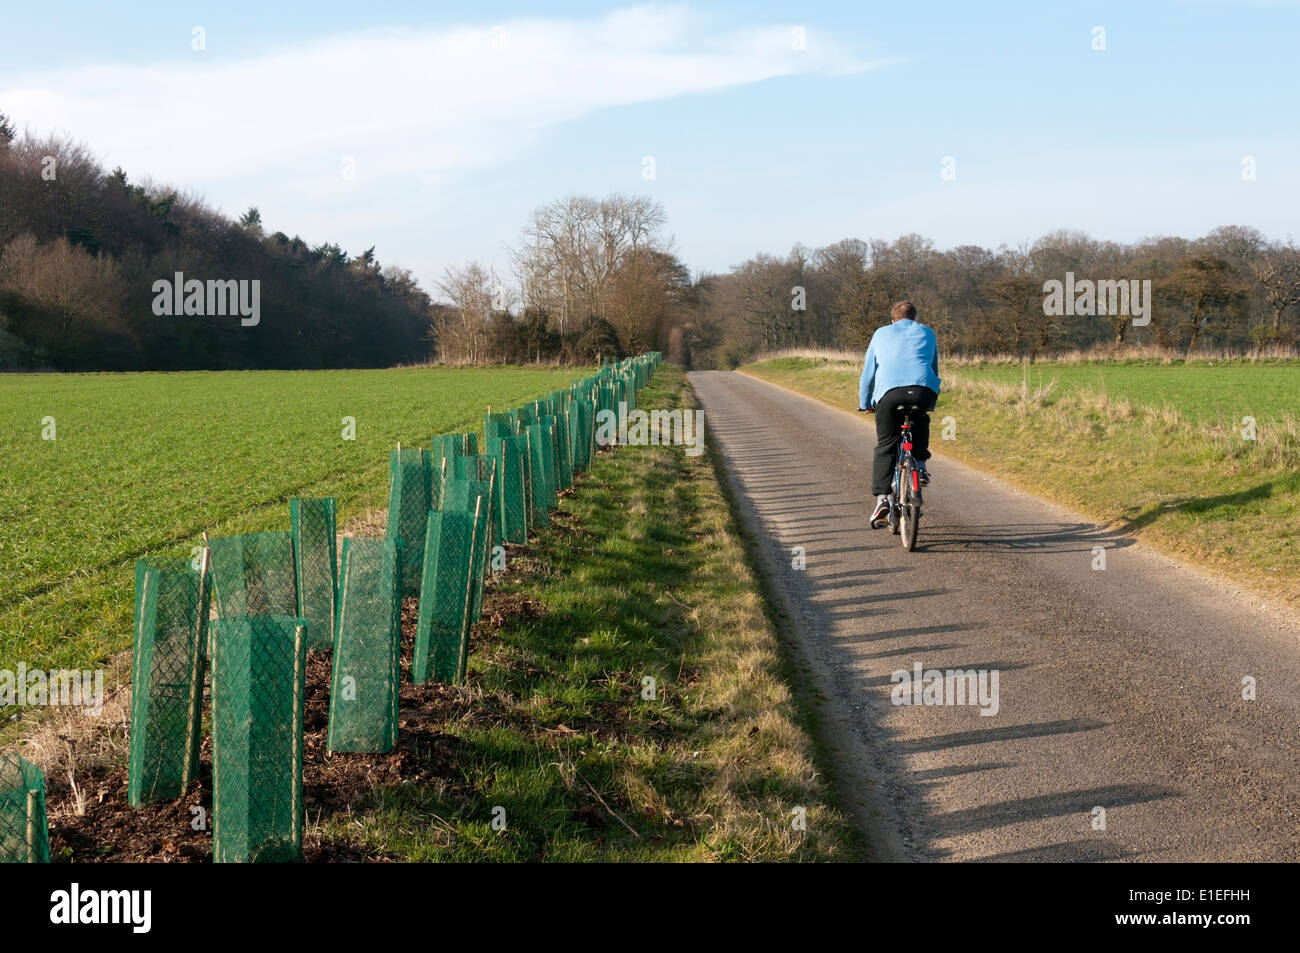 New roadside trees planted along a country lane leading to Anmer Hall on the Sandringham Estate, Norfolk. Stock Photo